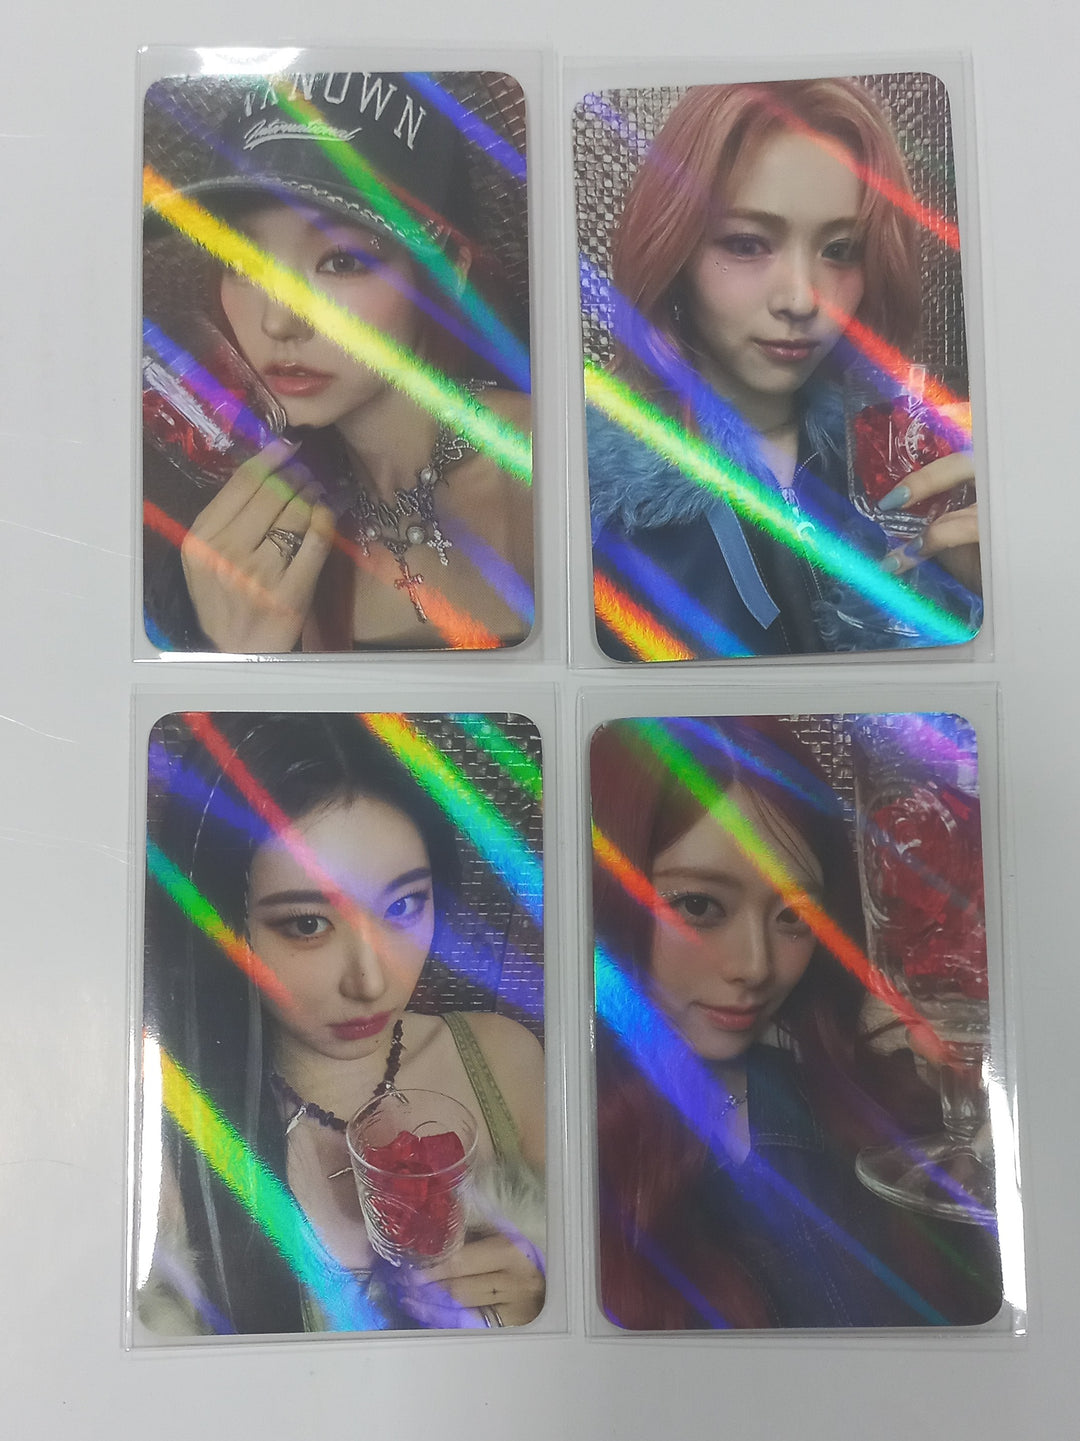 ITZY "BORN TO BE" - Makestar Pre-Order Benefit Hologram Photocard [24.1.12]